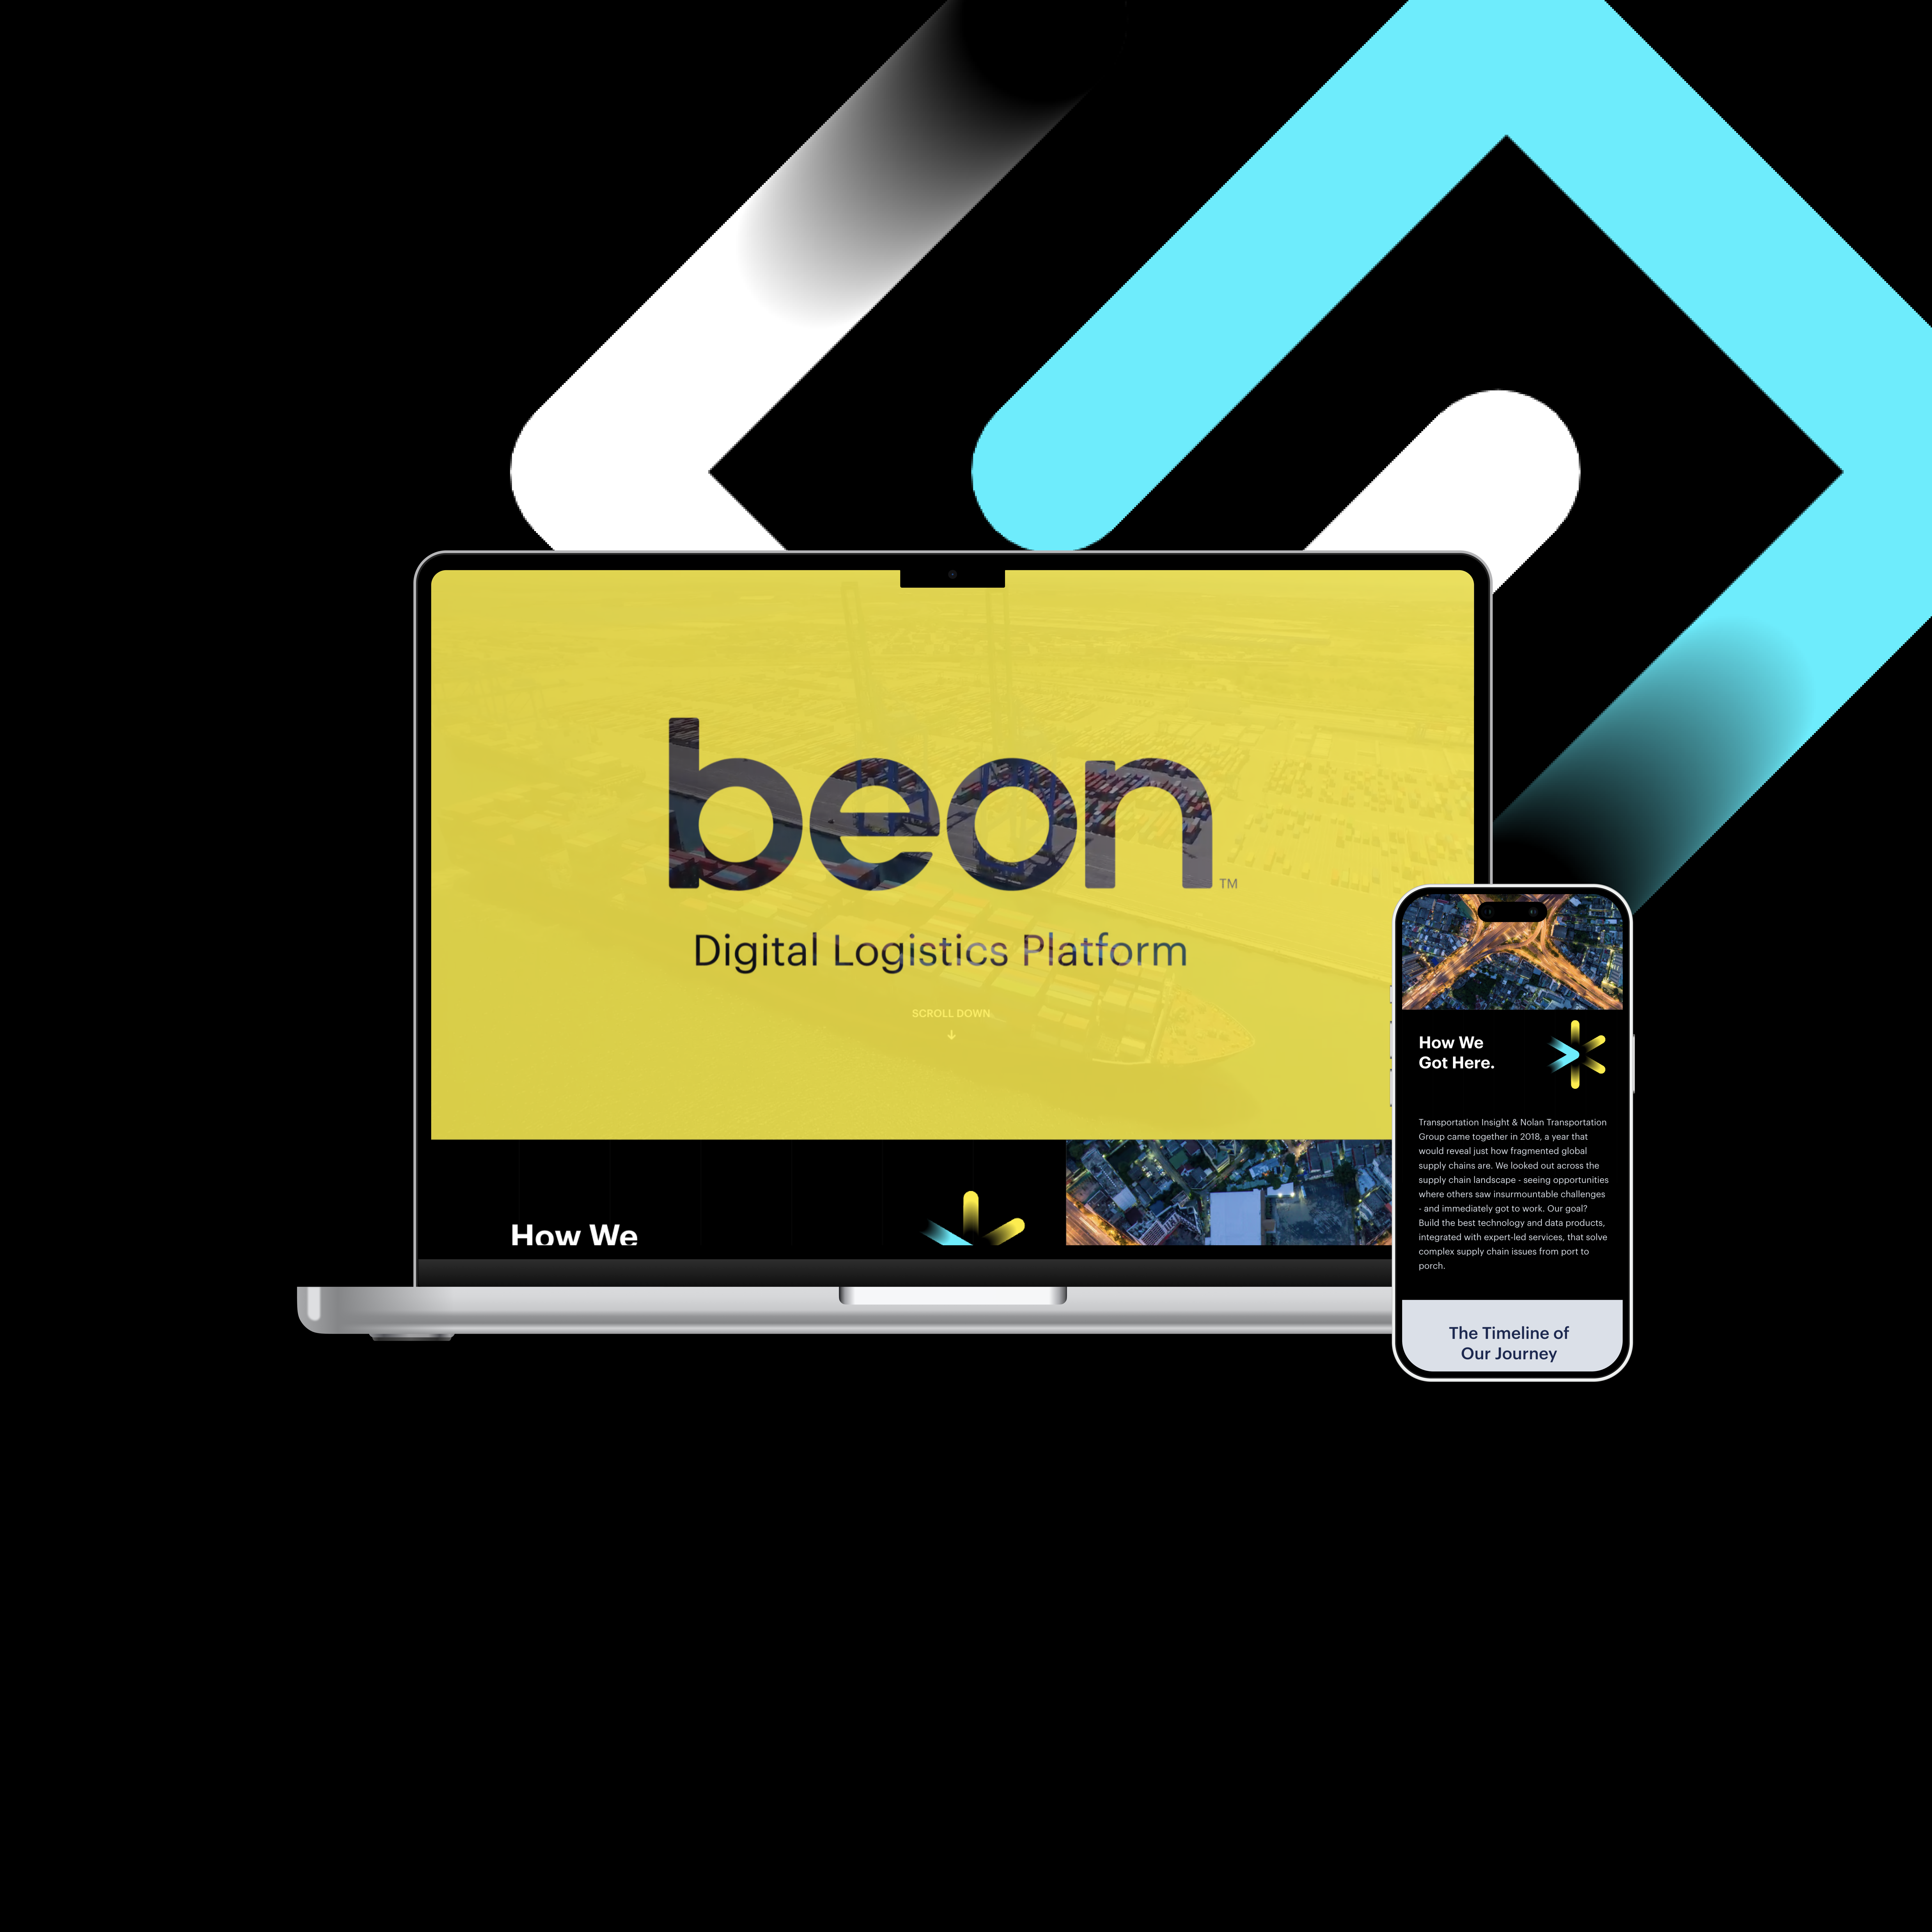 The Story of Beon